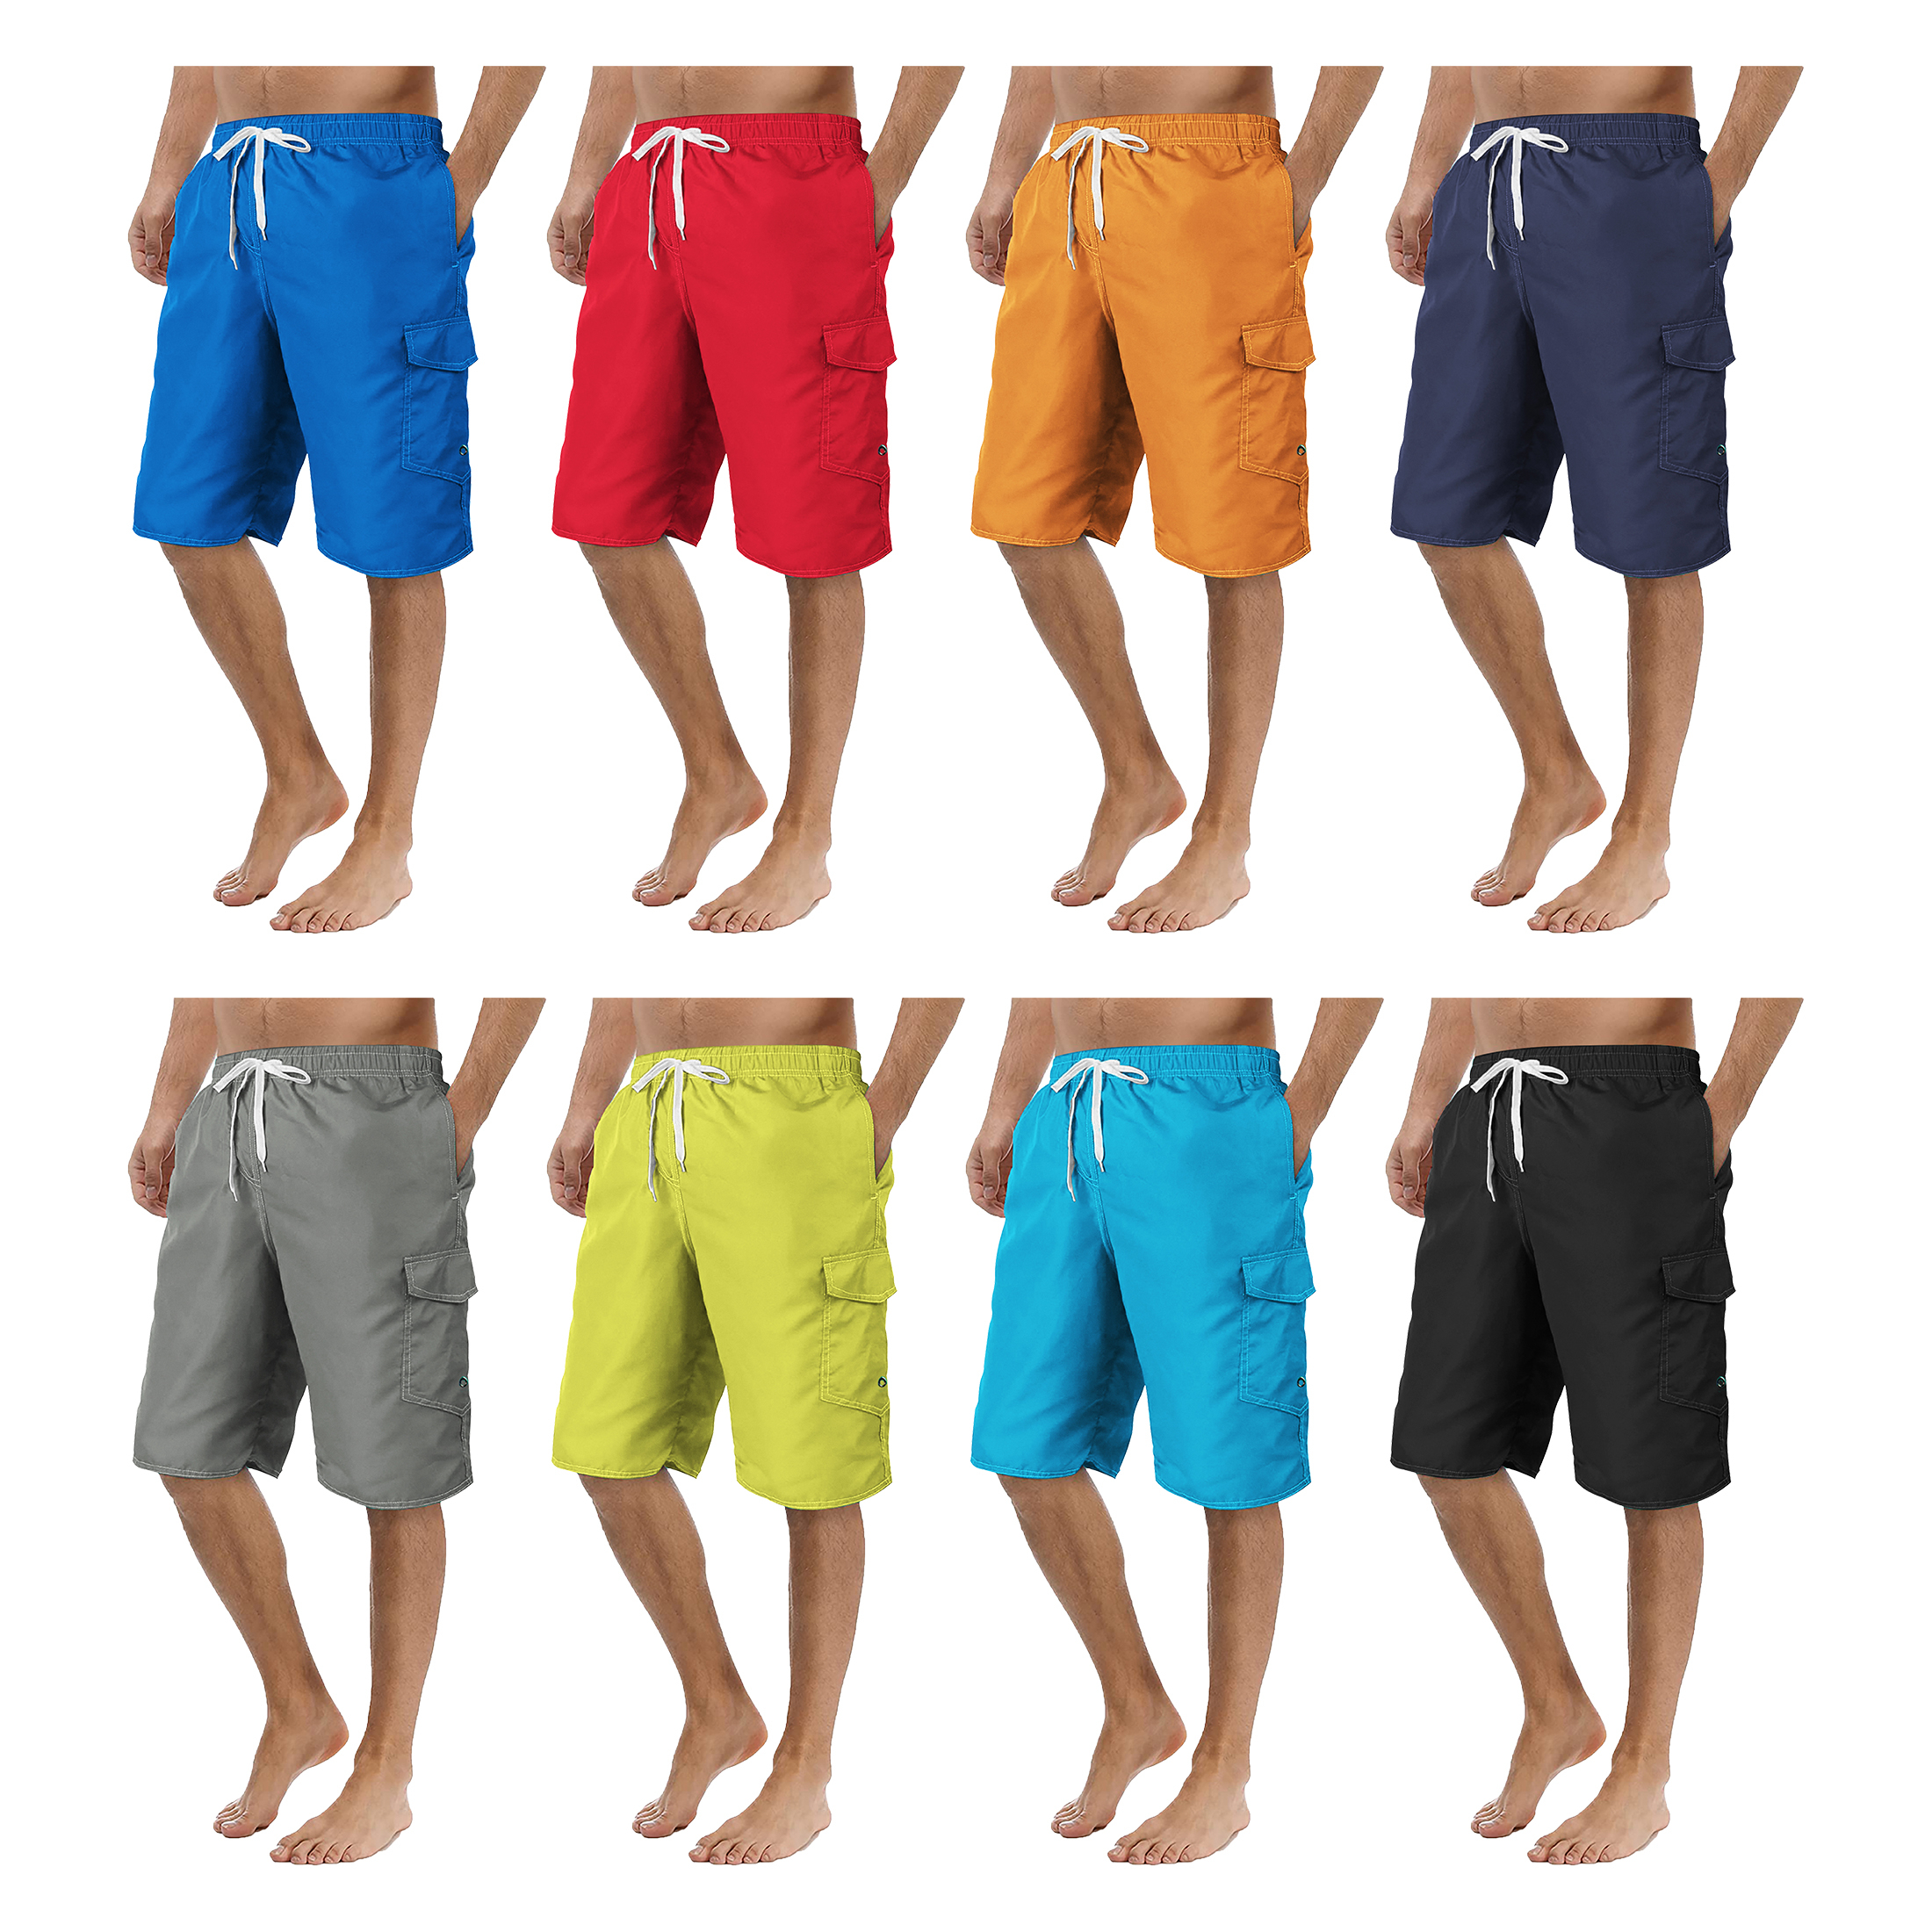 4-Pack Men's Quick Dry Cargo Swim Trunks Beachwear Bathing Suits With Pockets Solid Flex Board Shorts - M